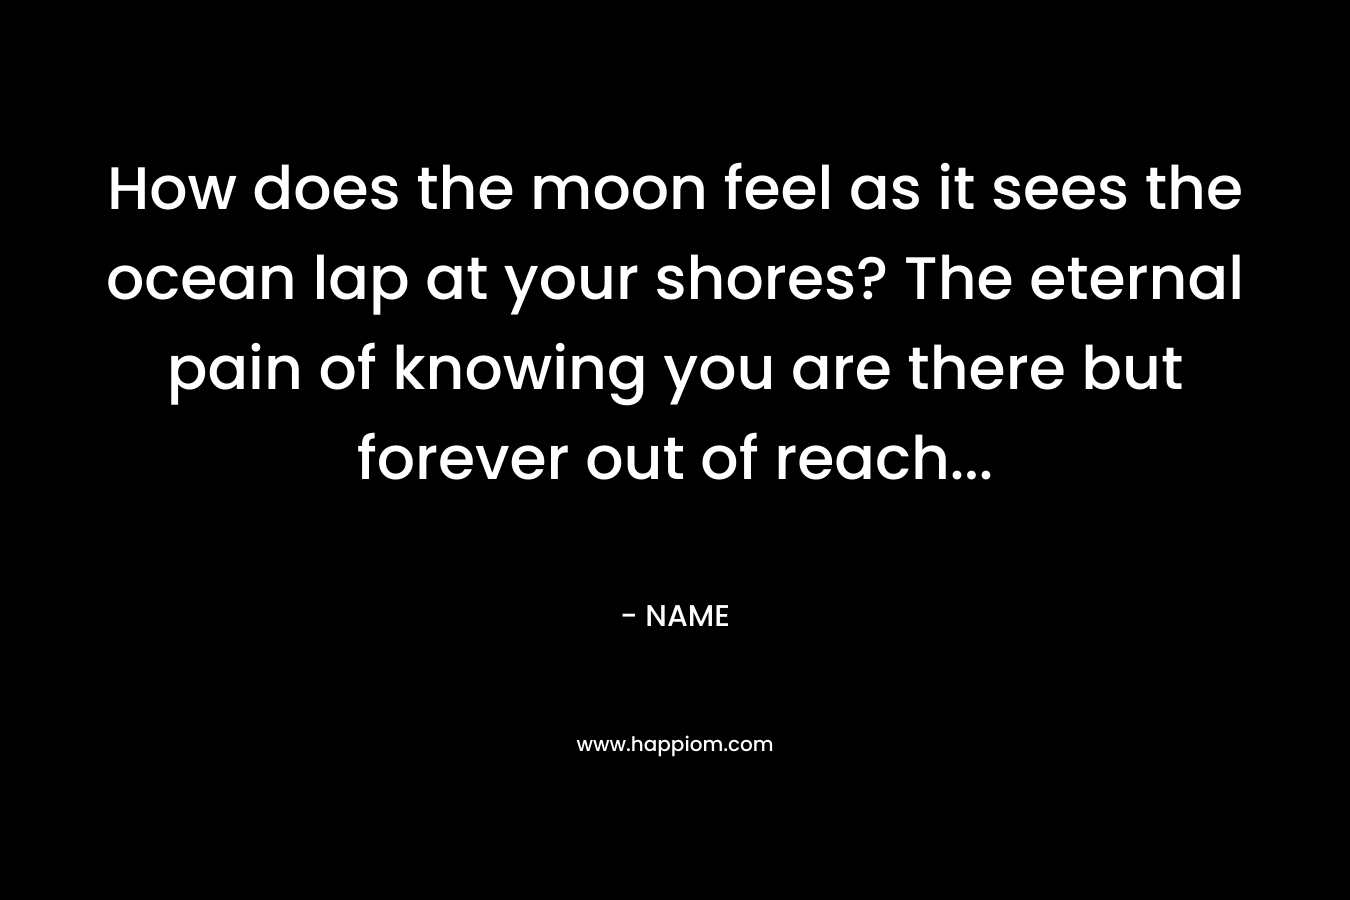 How does the moon feel as it sees the ocean lap at your shores? The eternal pain of knowing you are there but forever out of reach...